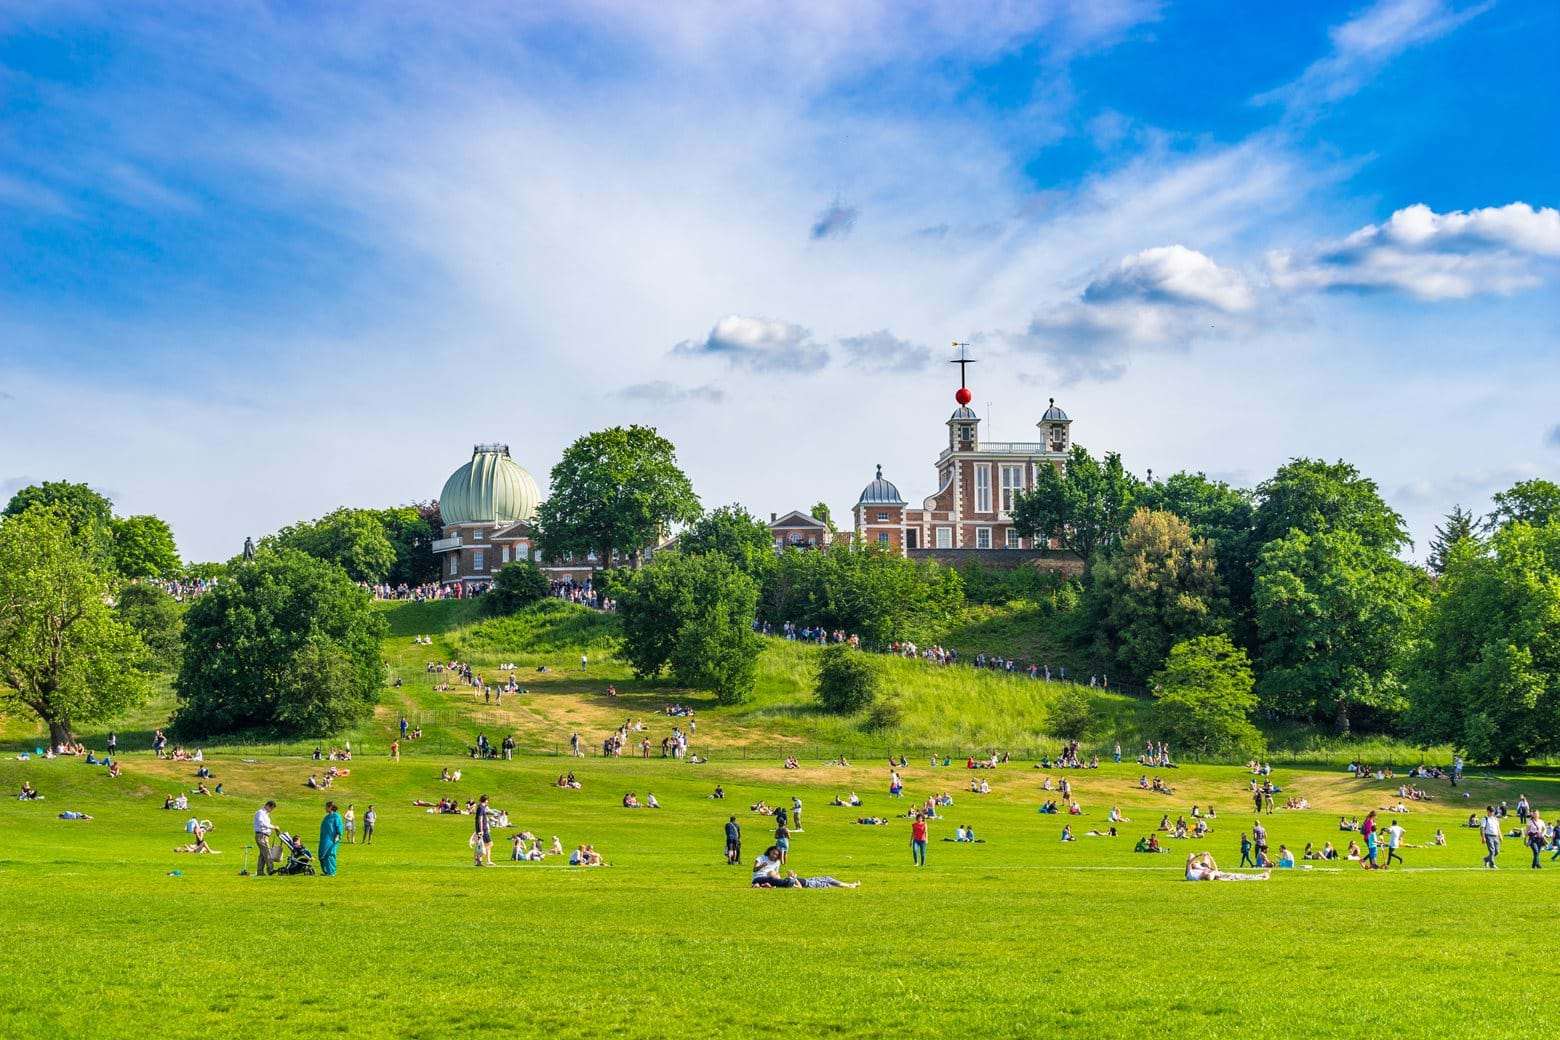 The Greenwich Park